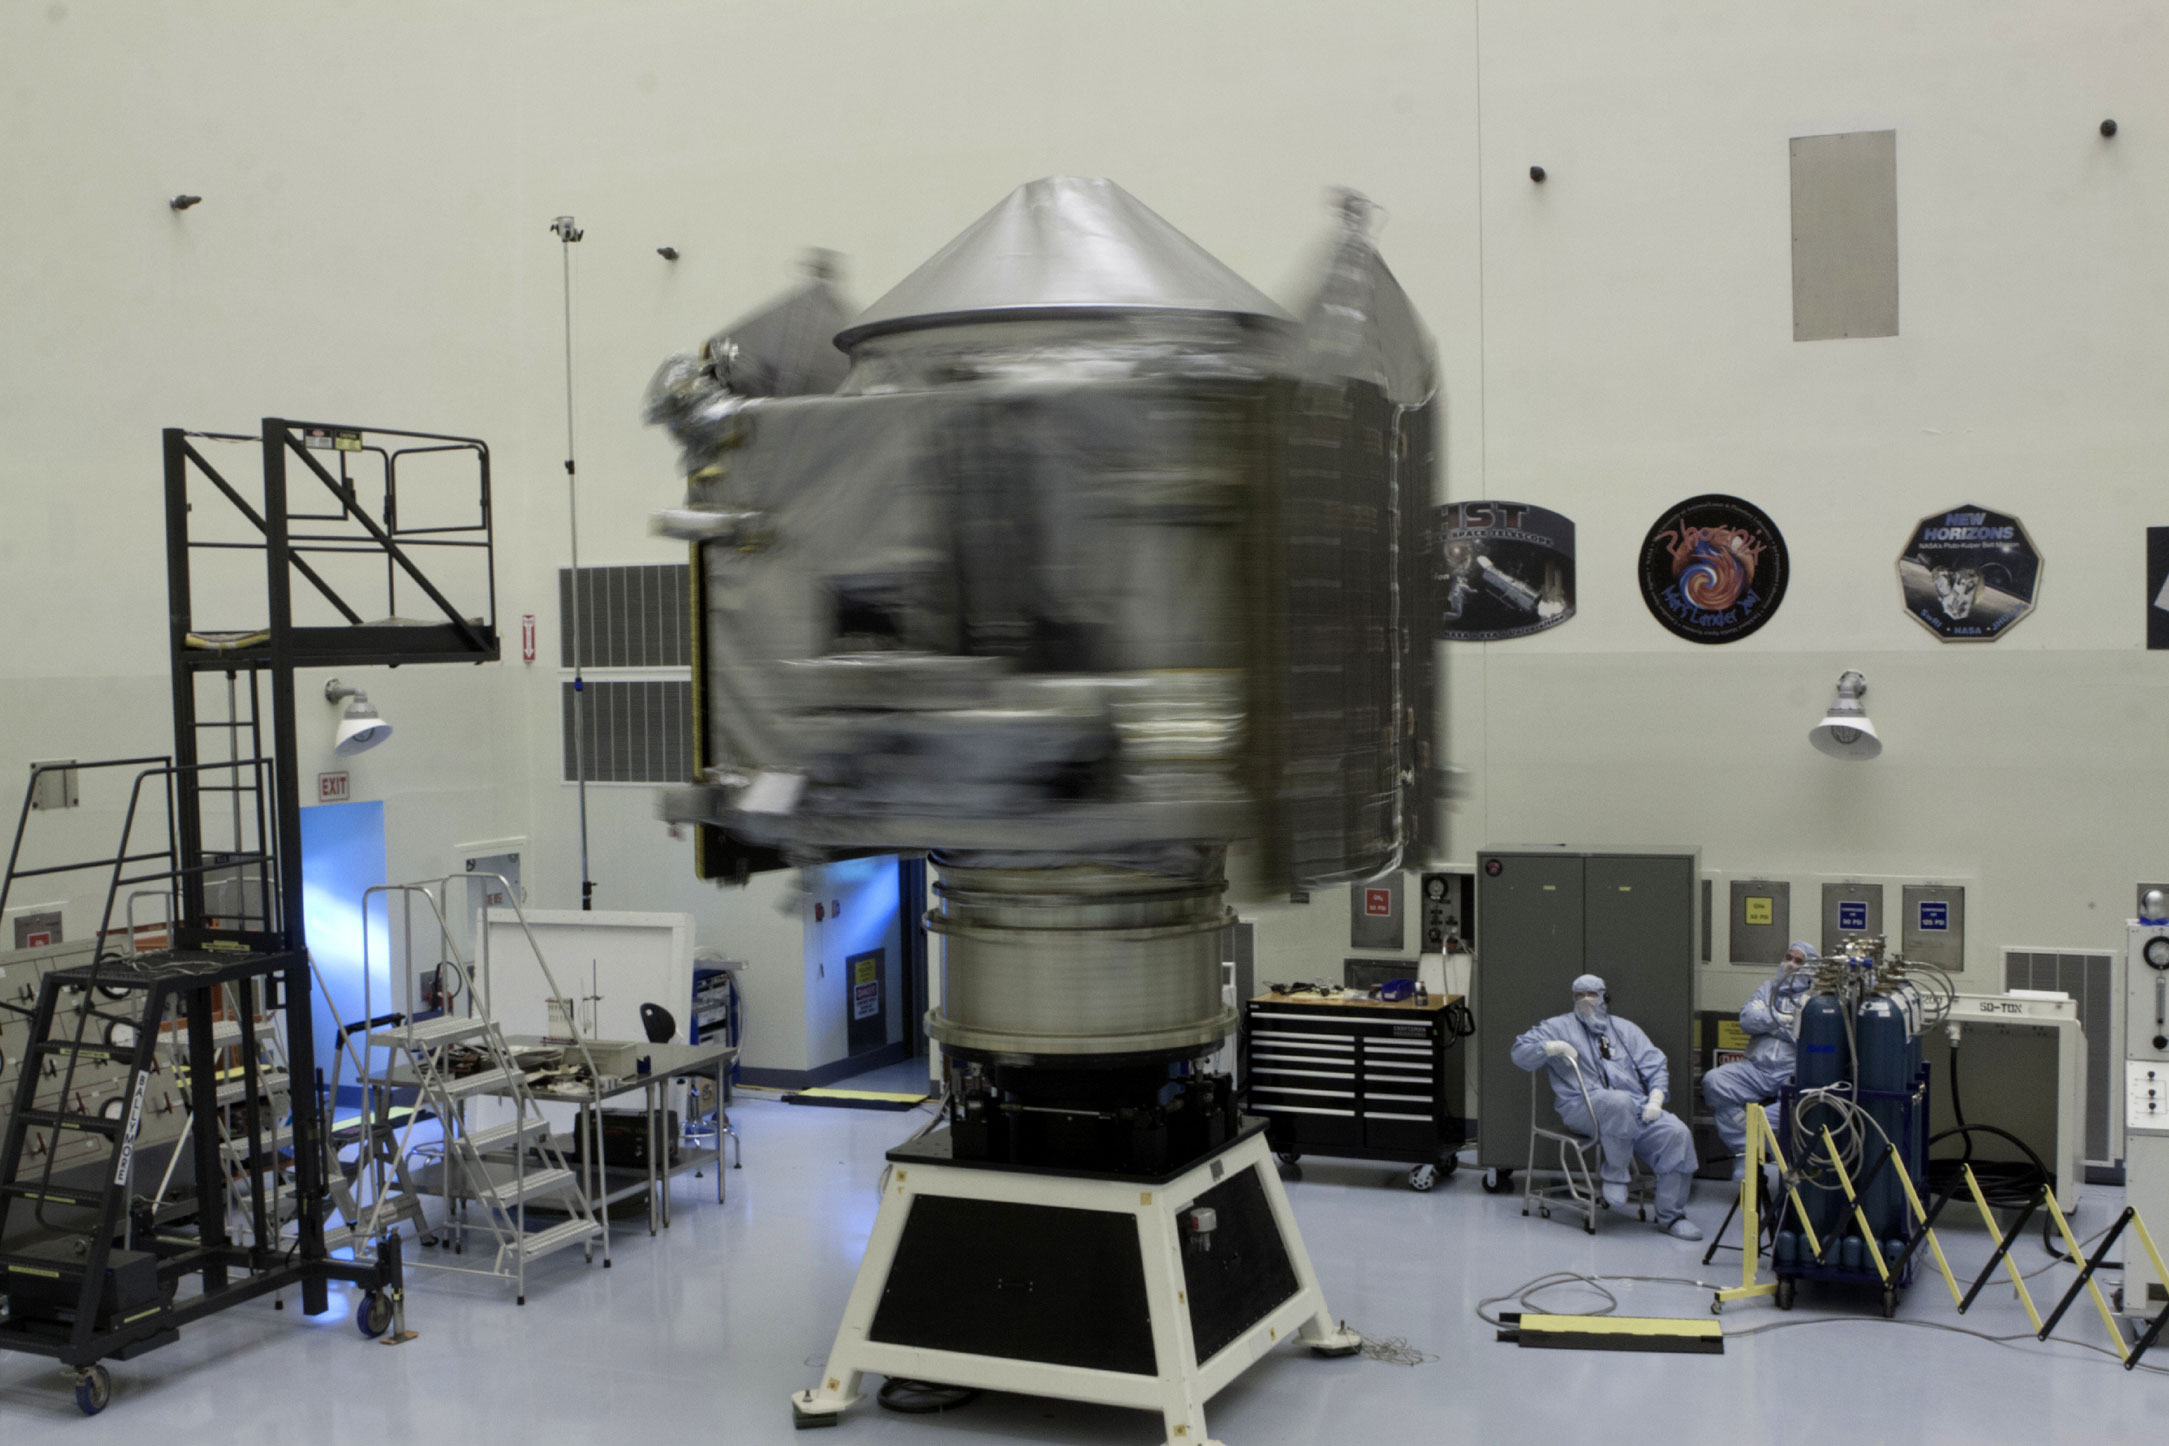 Inside the Payload Hazardous Servicing Facility at NASA's Kennedy Space Center in Florida, engineers and technicians perform a spin test of the Mars Atmosphere and Volatile Evolution, or MAVEN, spacecraft. The operation is designed to verify that MAVEN is properly balanced as it spins during the initial mission activities.